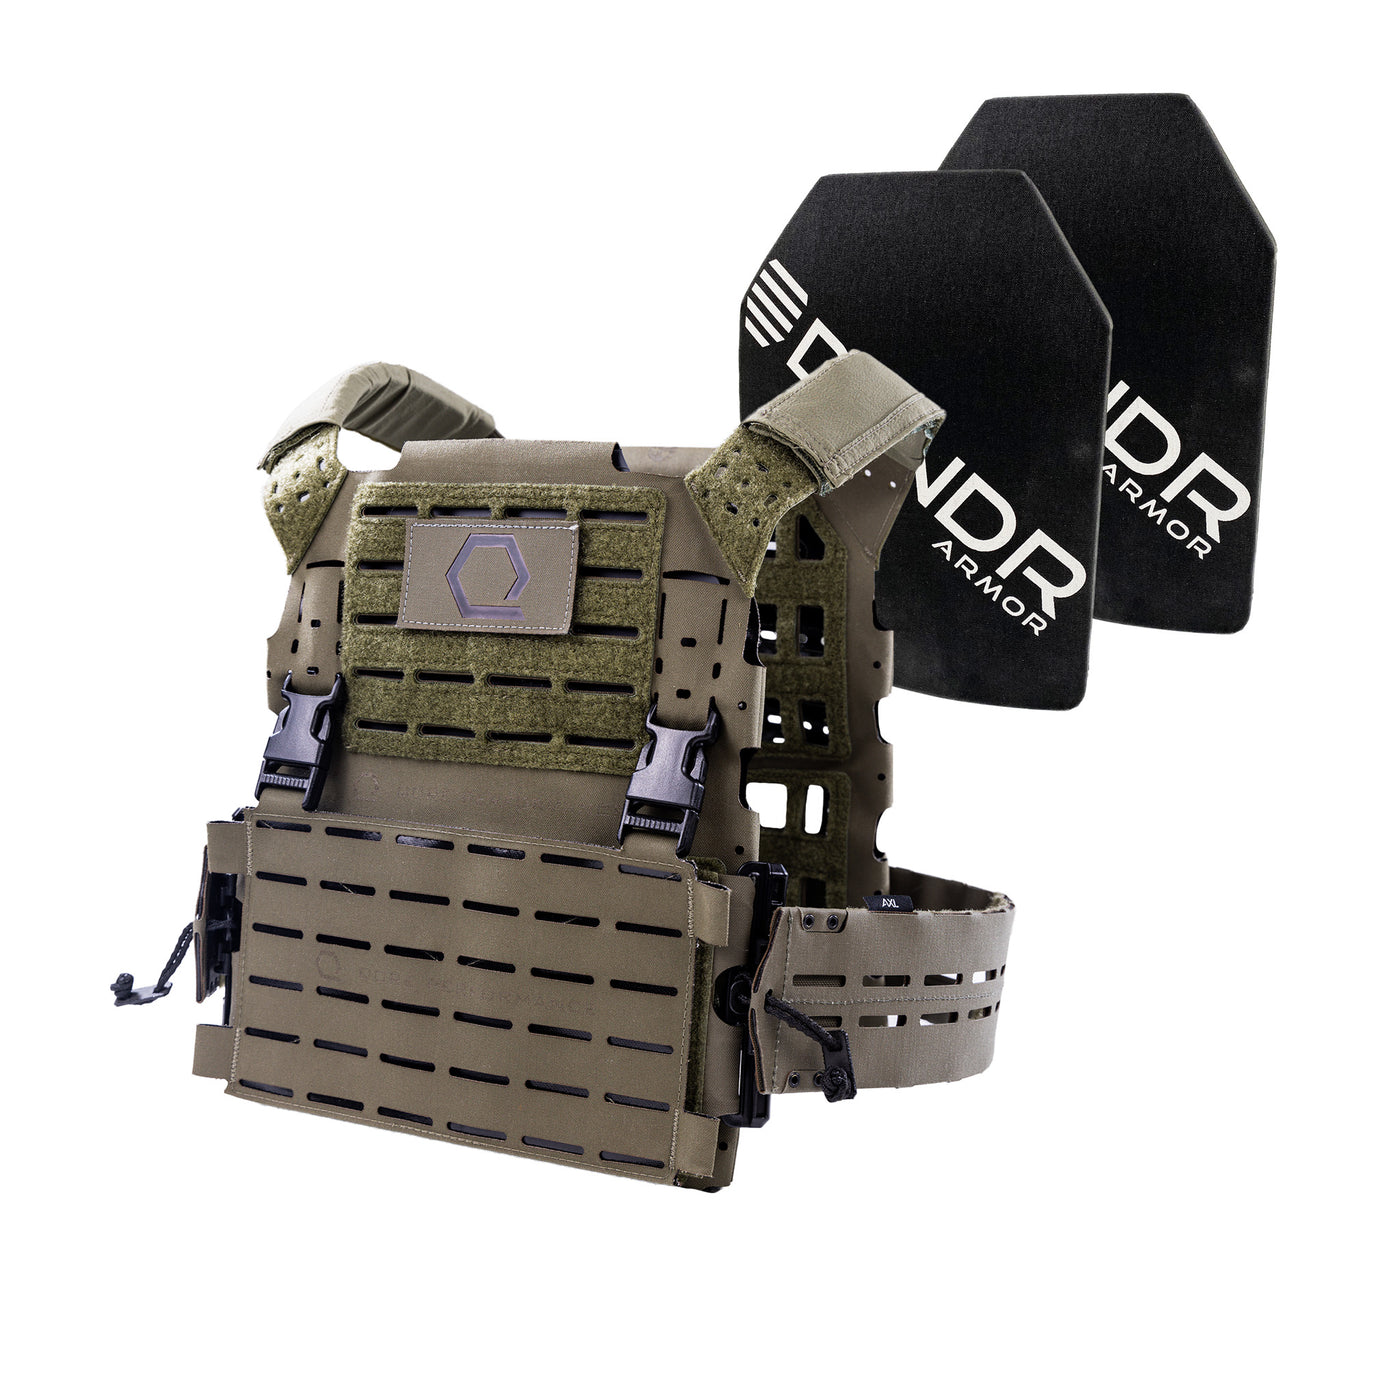 ICEPLATE EXO® DFNDR Level IV Armor Package - Launch Edition (includes 2 x DFNDR Armor Rifle Rated Hard Plates)